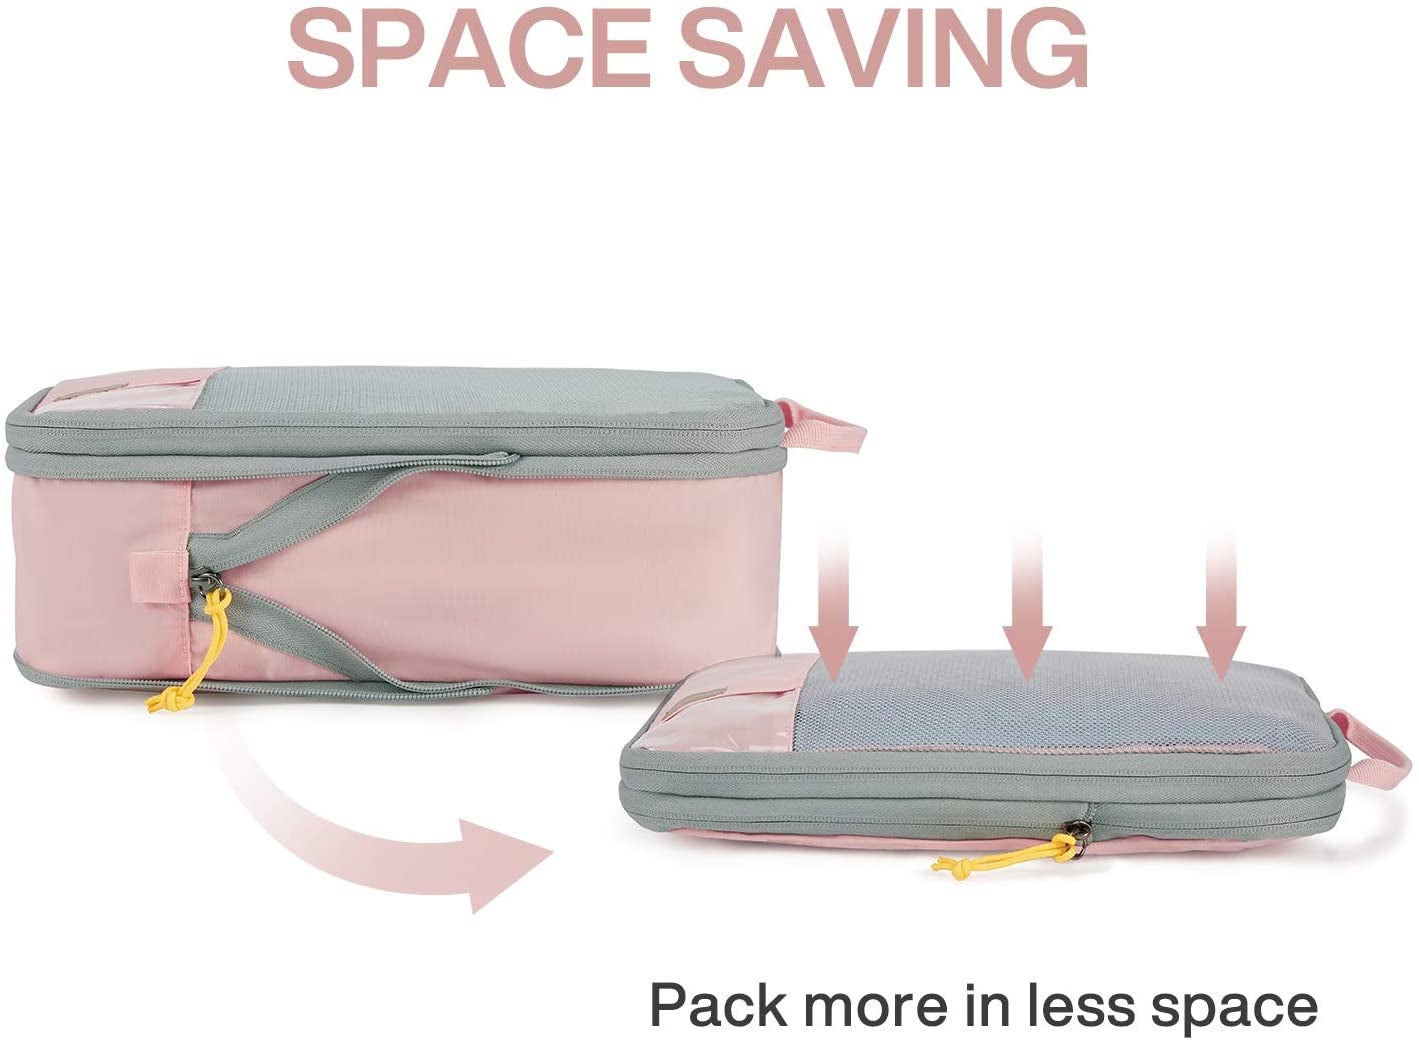 29 Space-Saving Travel Products To Help Fit A Lot In Your Suitcase